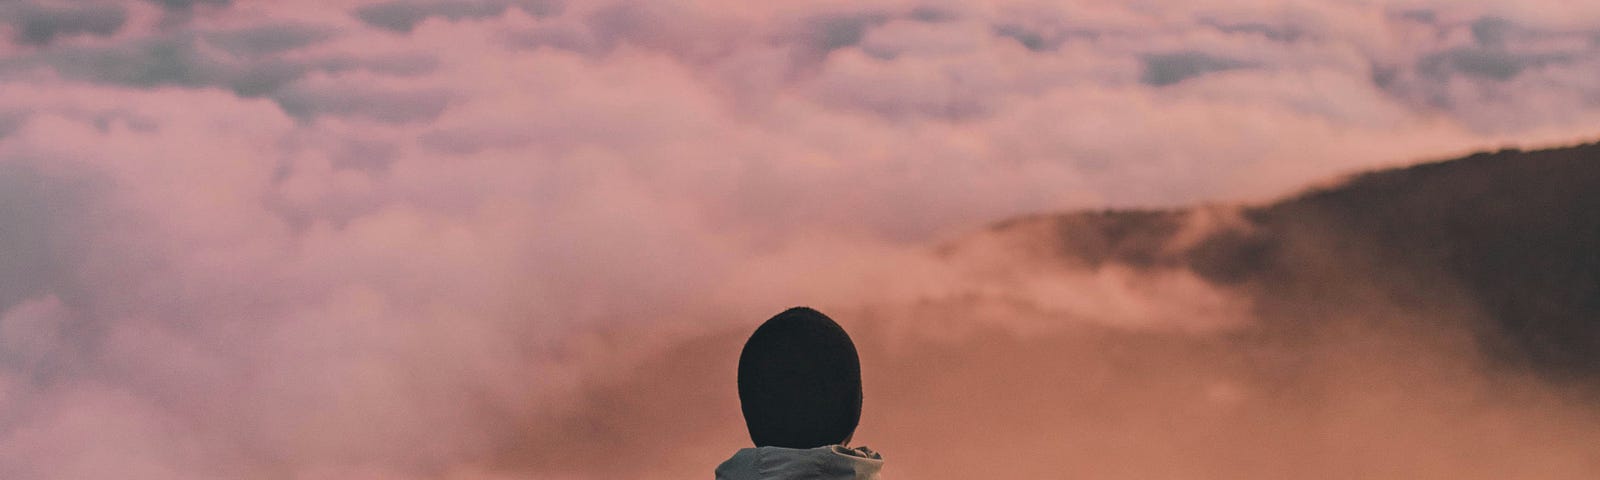 Man on the edge of a cliff overlooking a sea of clouds.